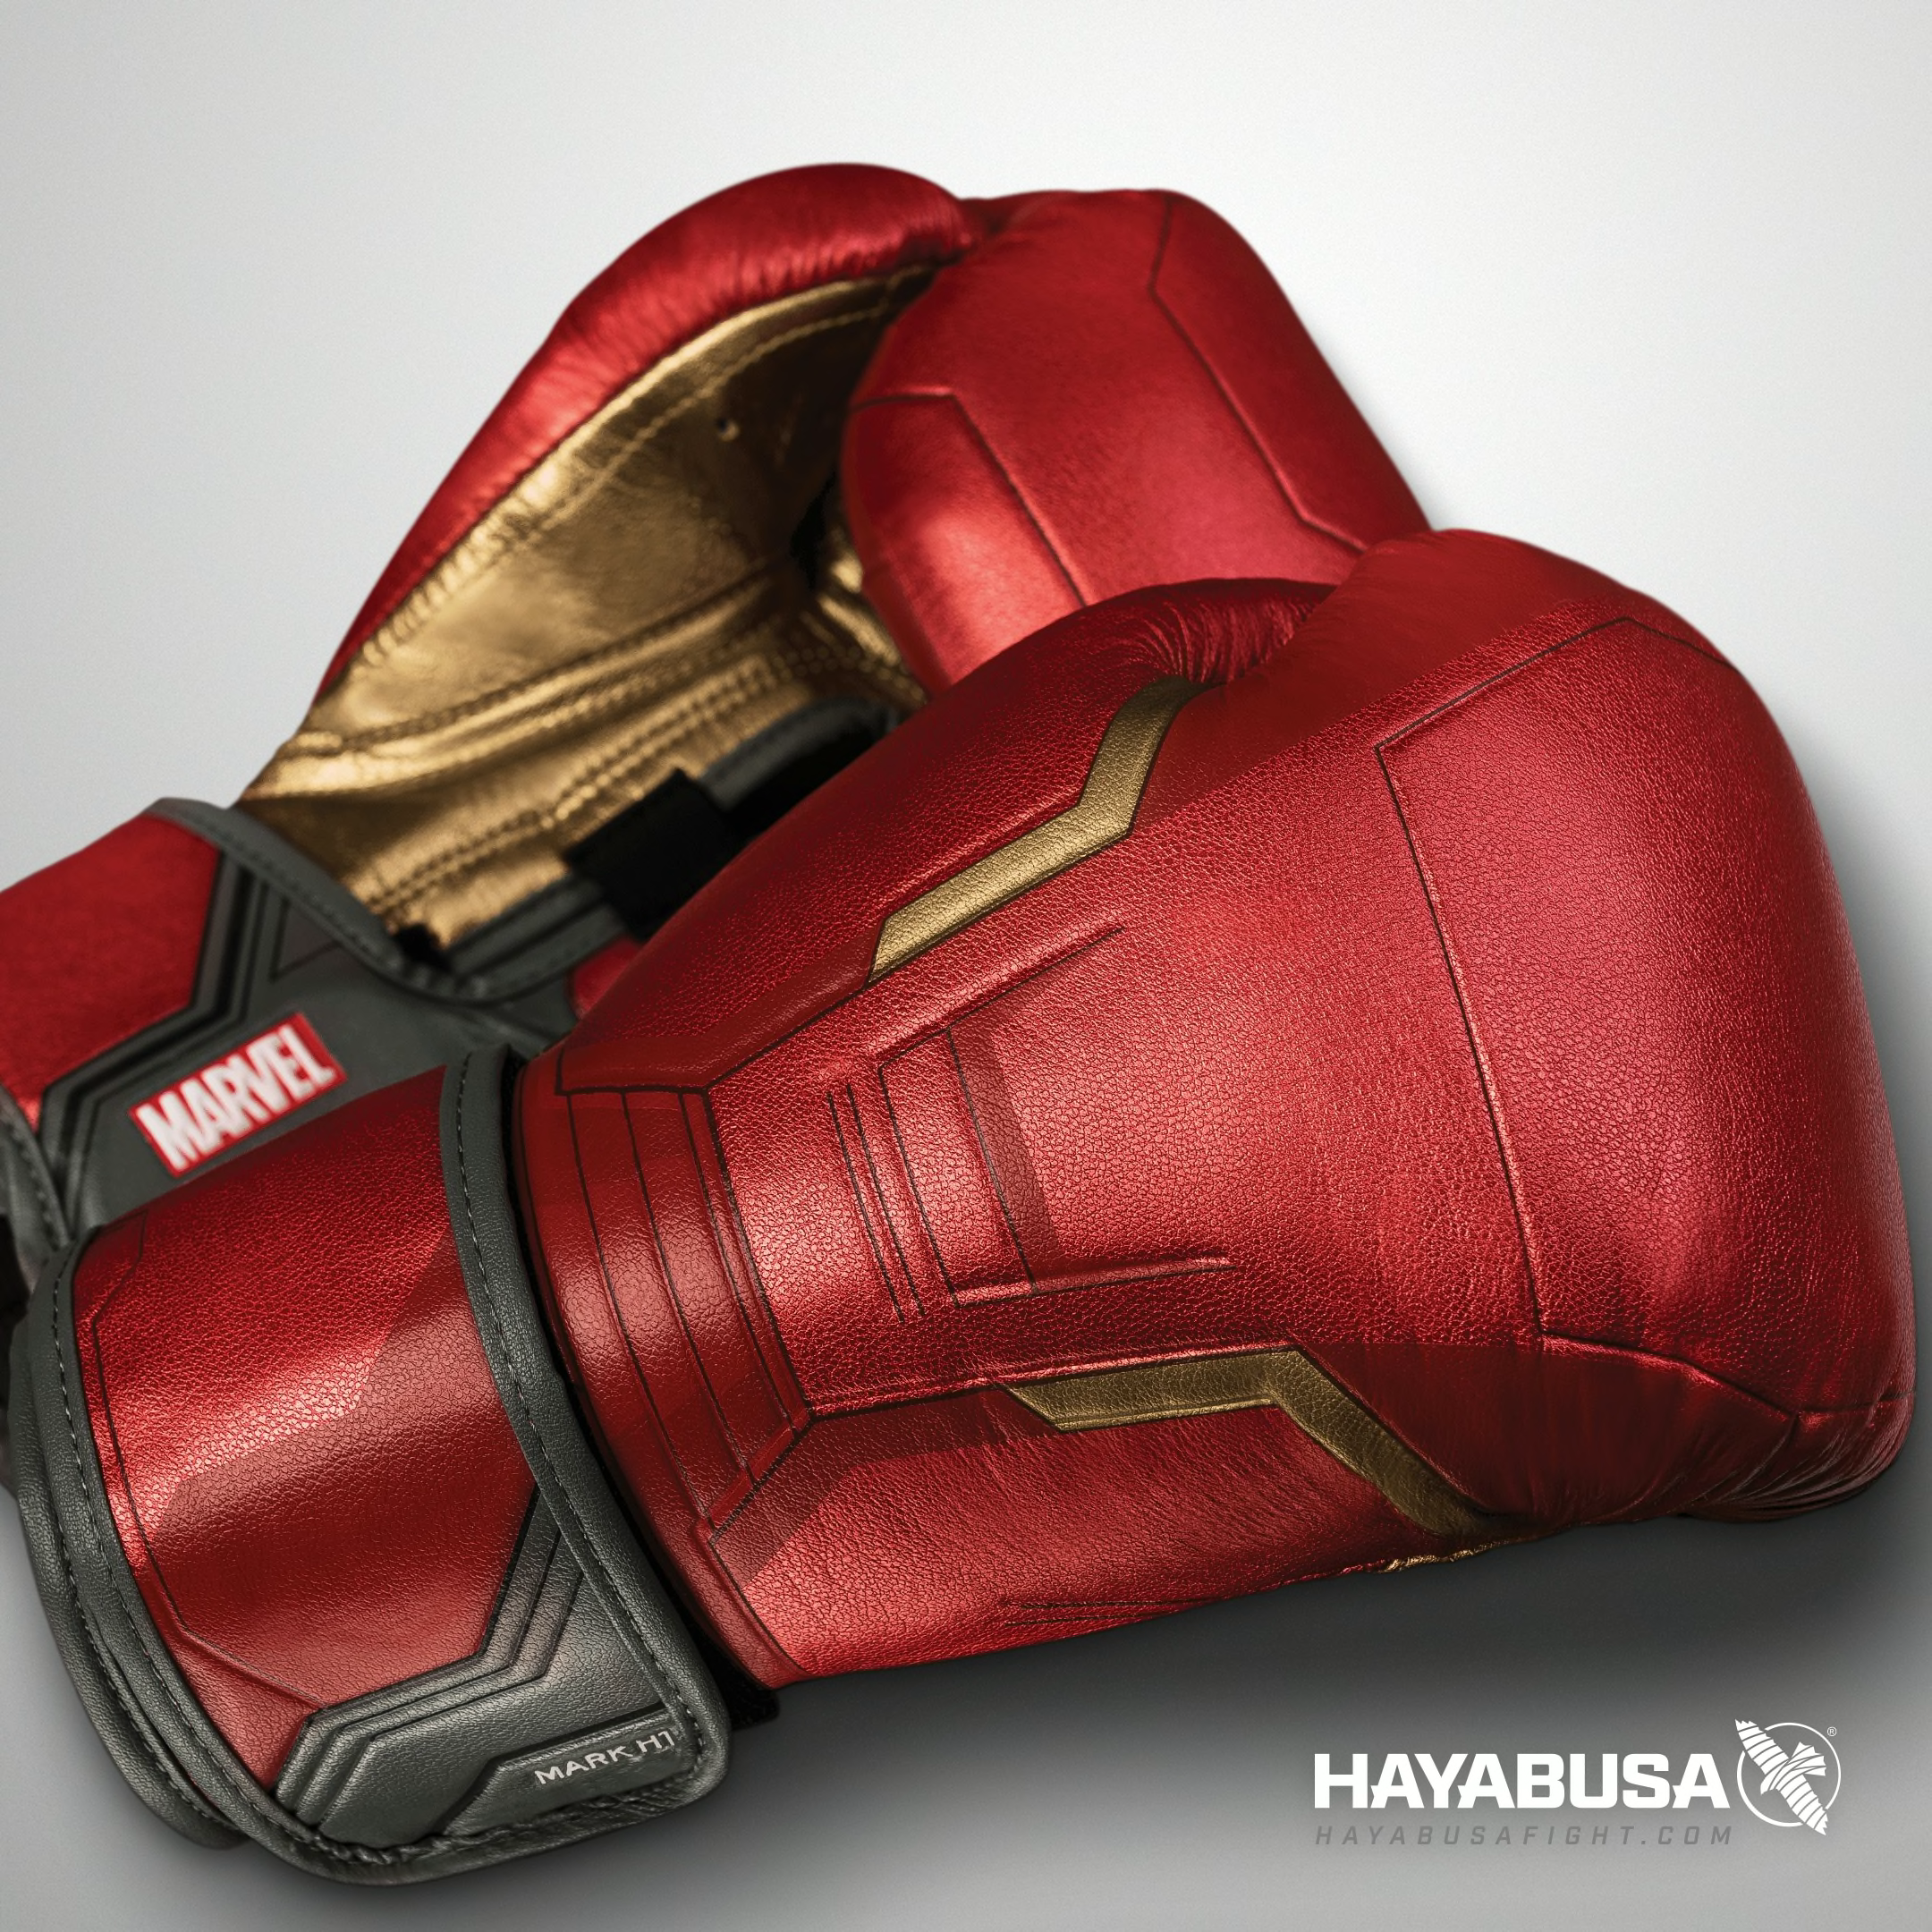 These Marvel boxing gloves from Hayabusa will make you